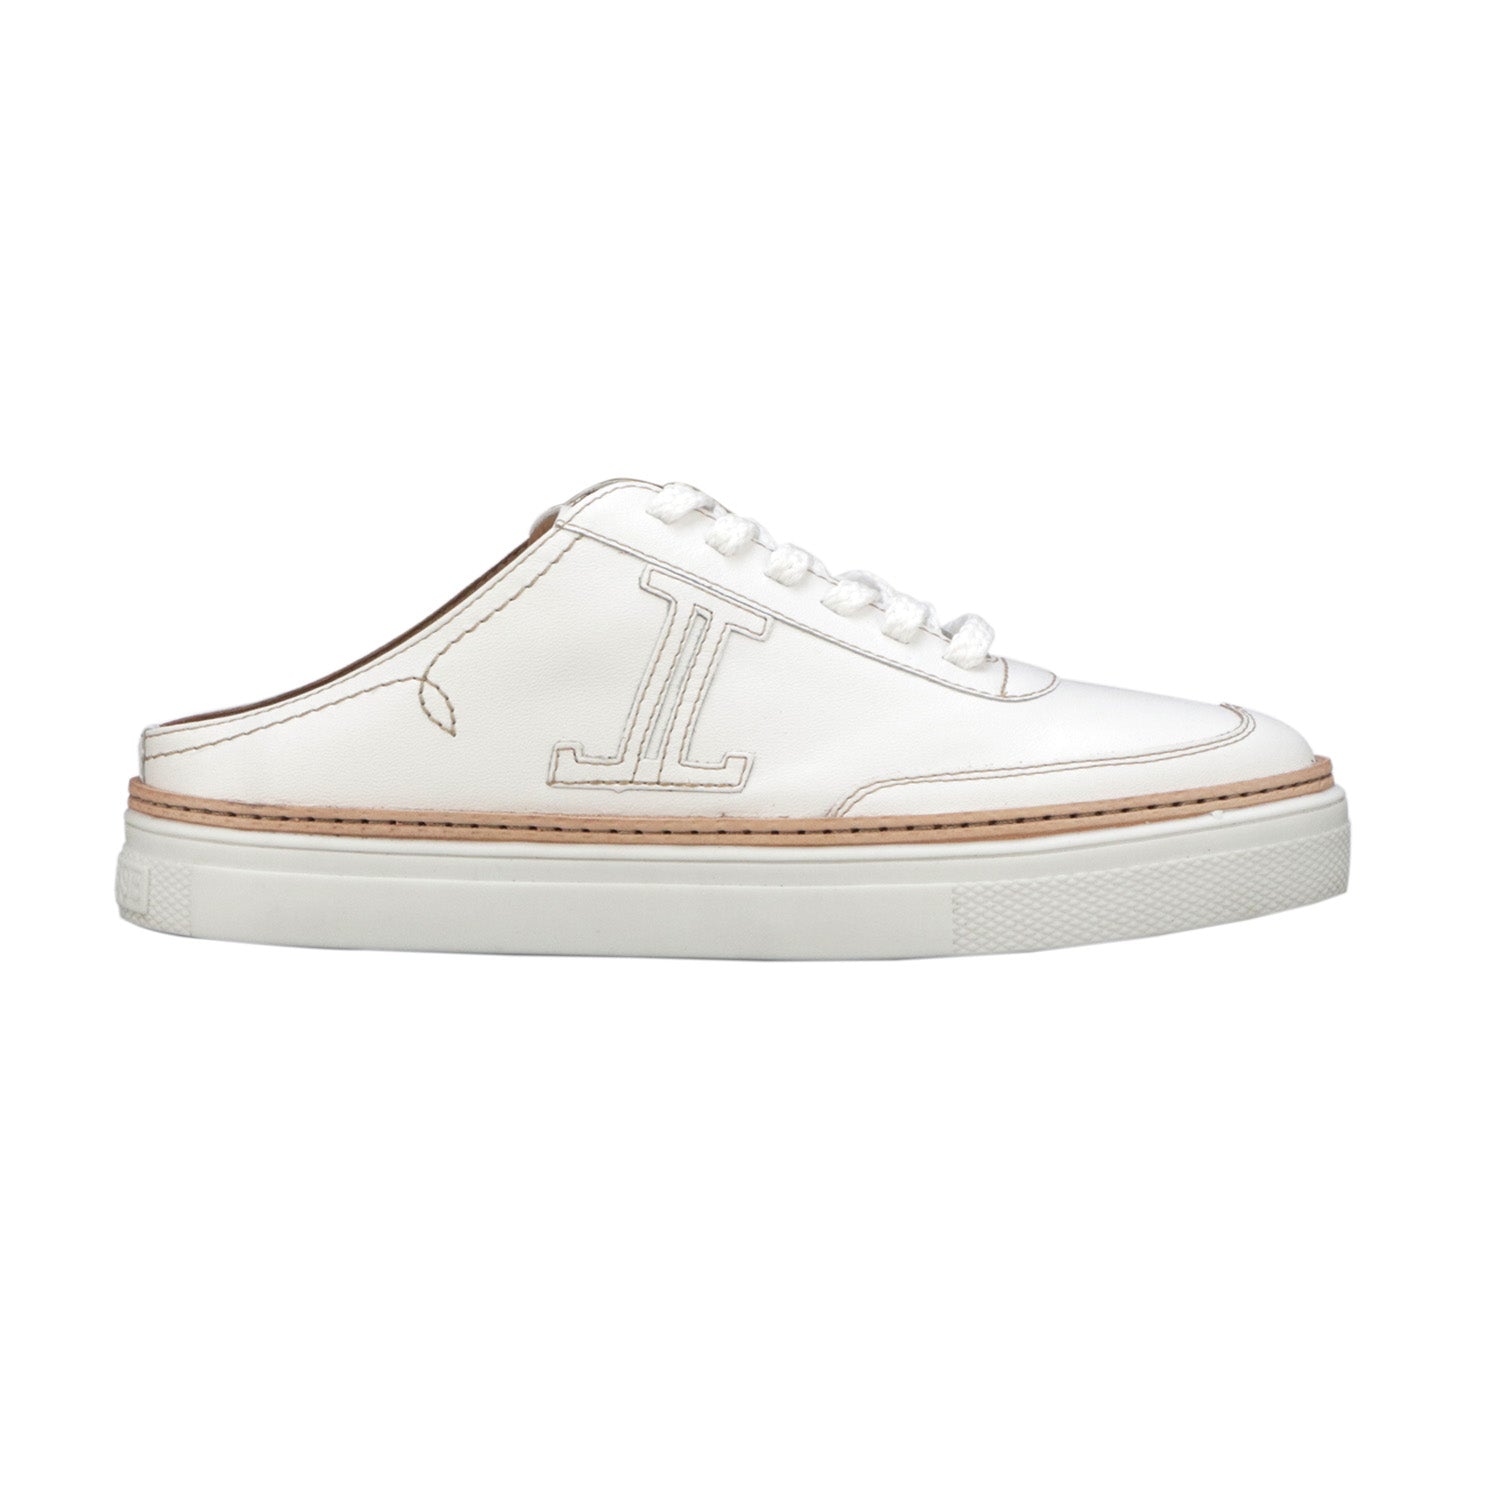 Sneaker Frontrow Louis Vuitton Top Sellers, SAVE 45